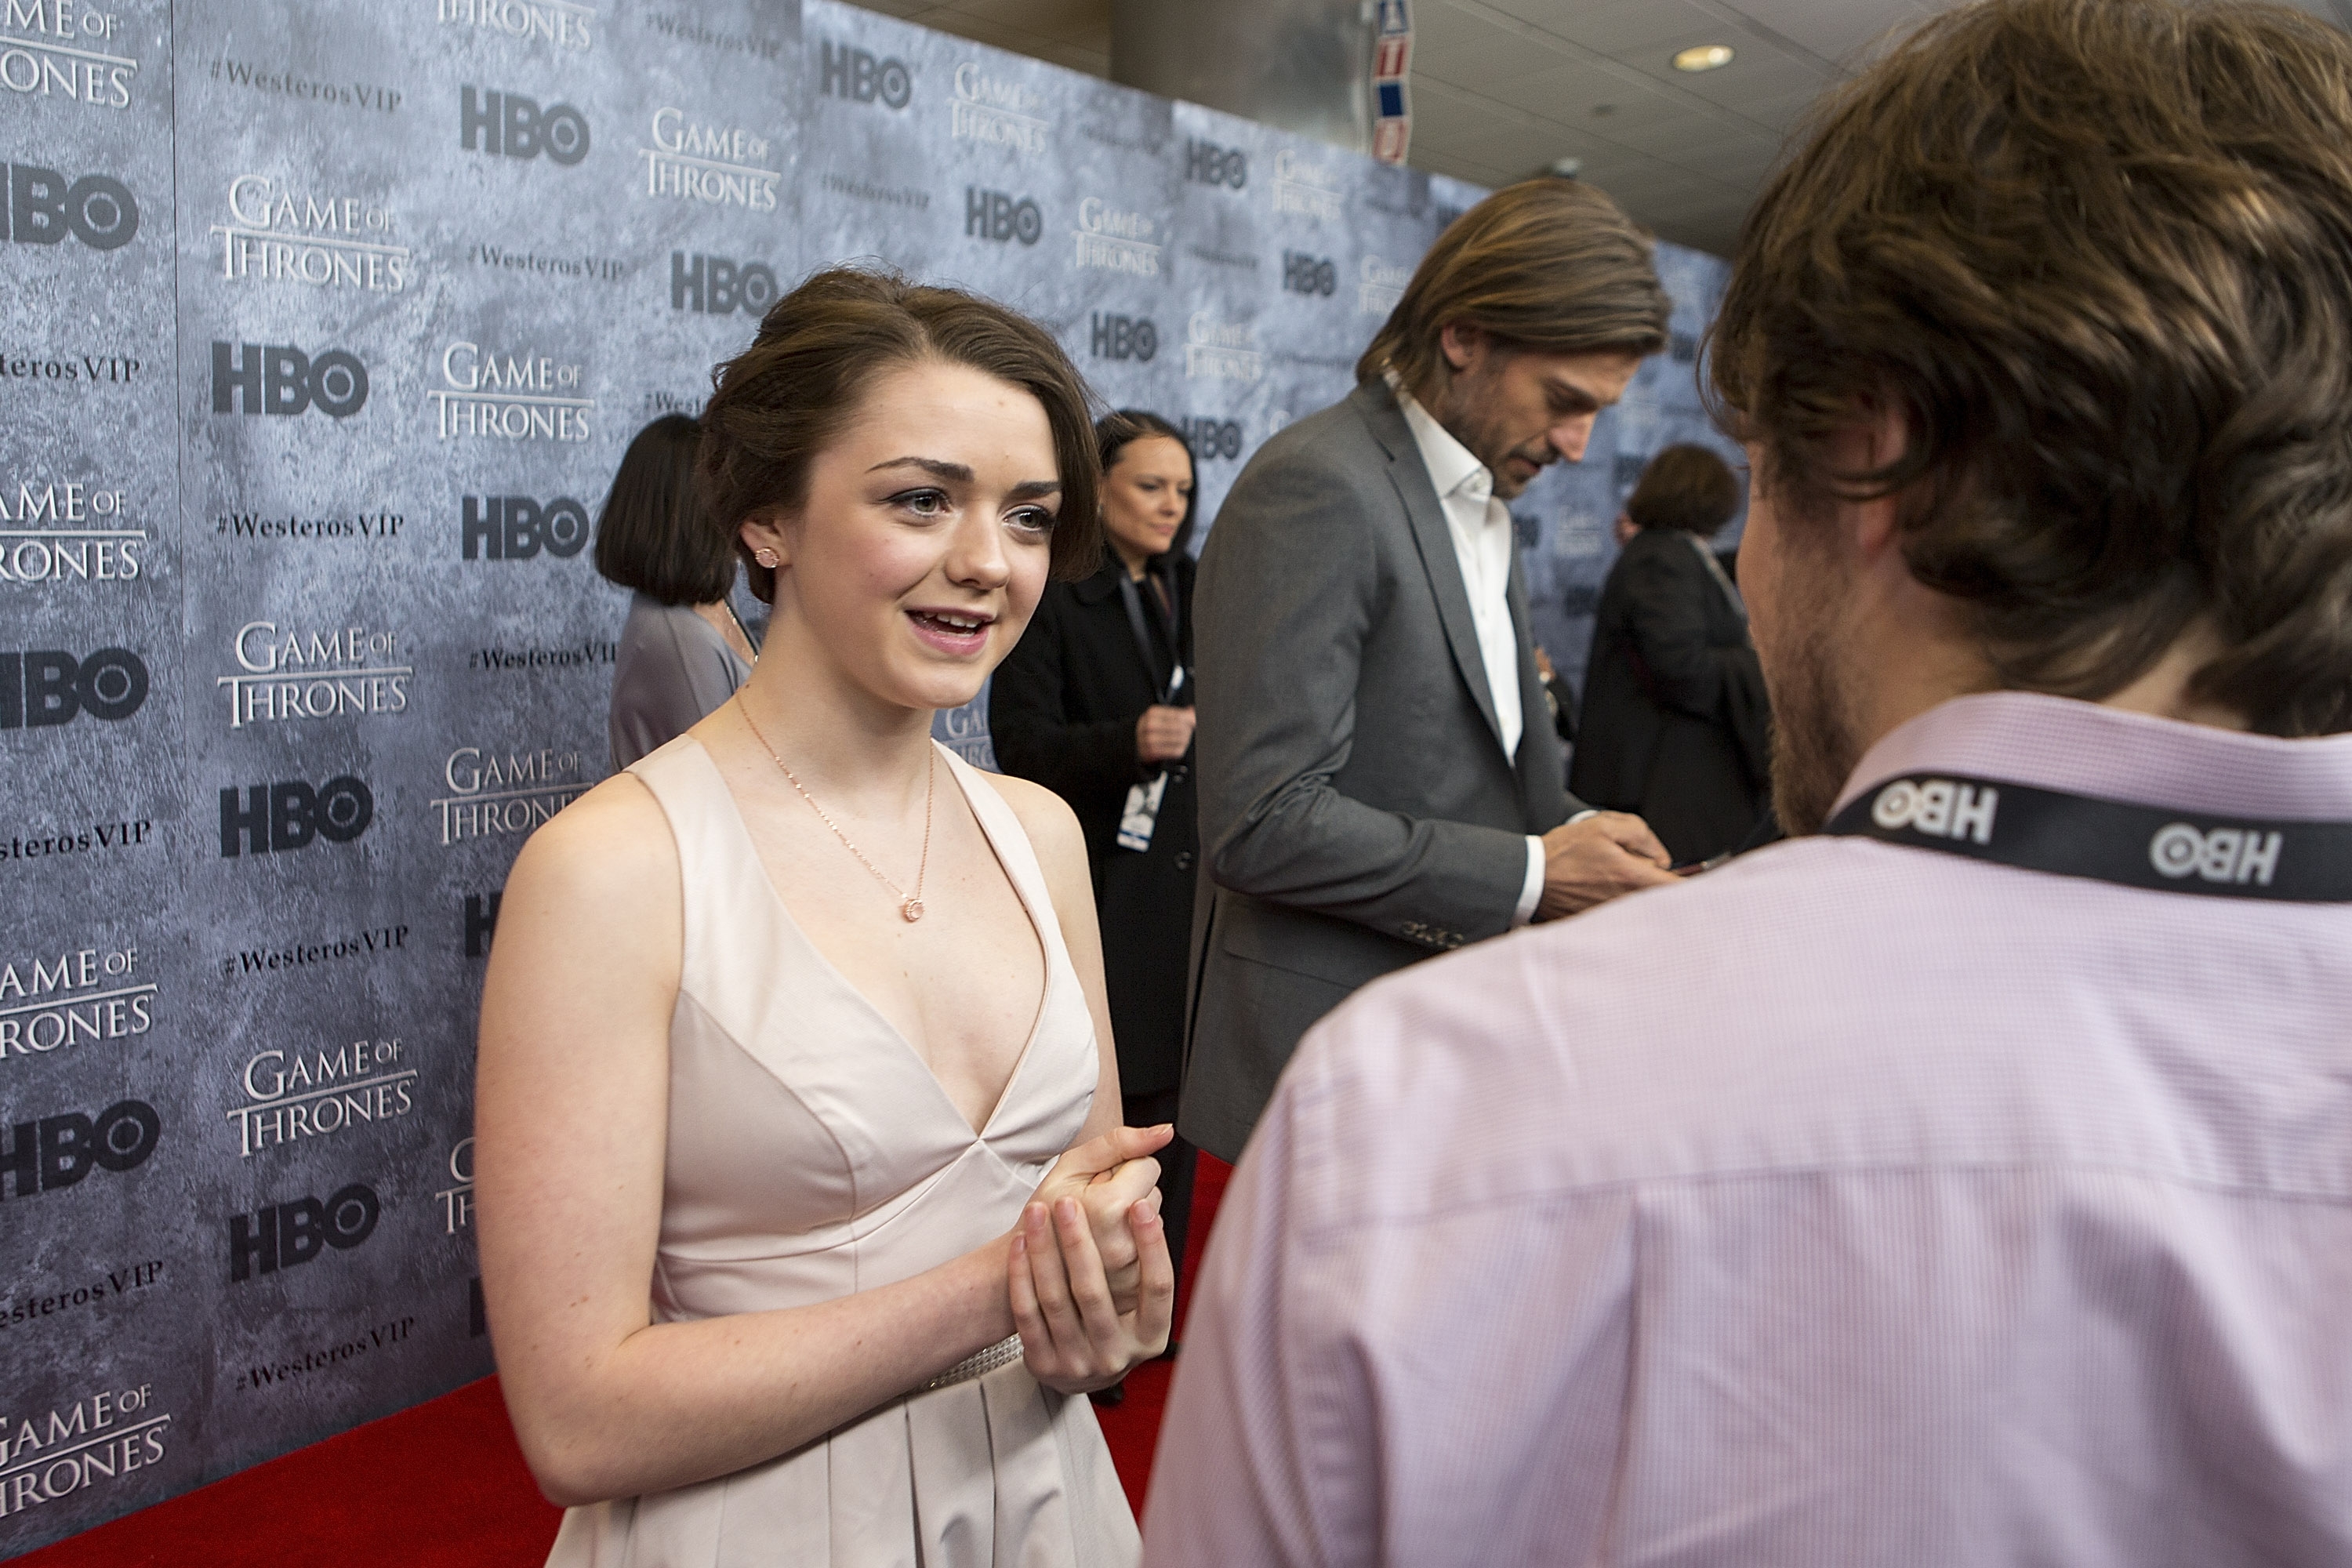 https://maisiewilliams.org/gallery/albums/Public Apperances/2013/March 21st-Game of Thrones Season 3 Seattle Premiere/0020.jpg